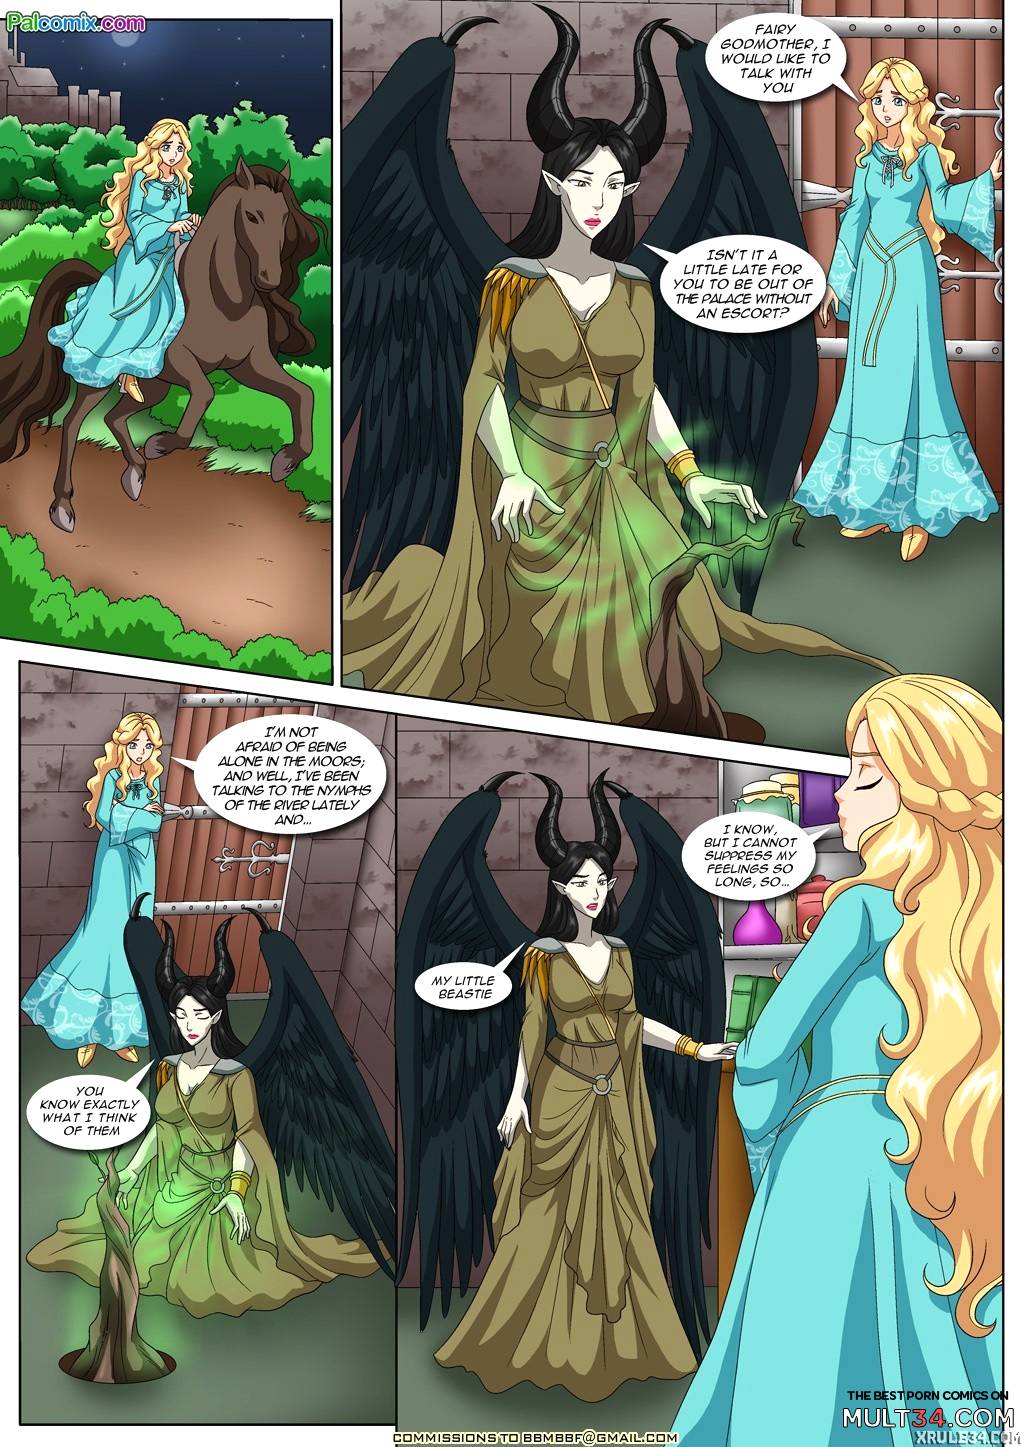 Coming of Age - Sleeping Beauty page 6